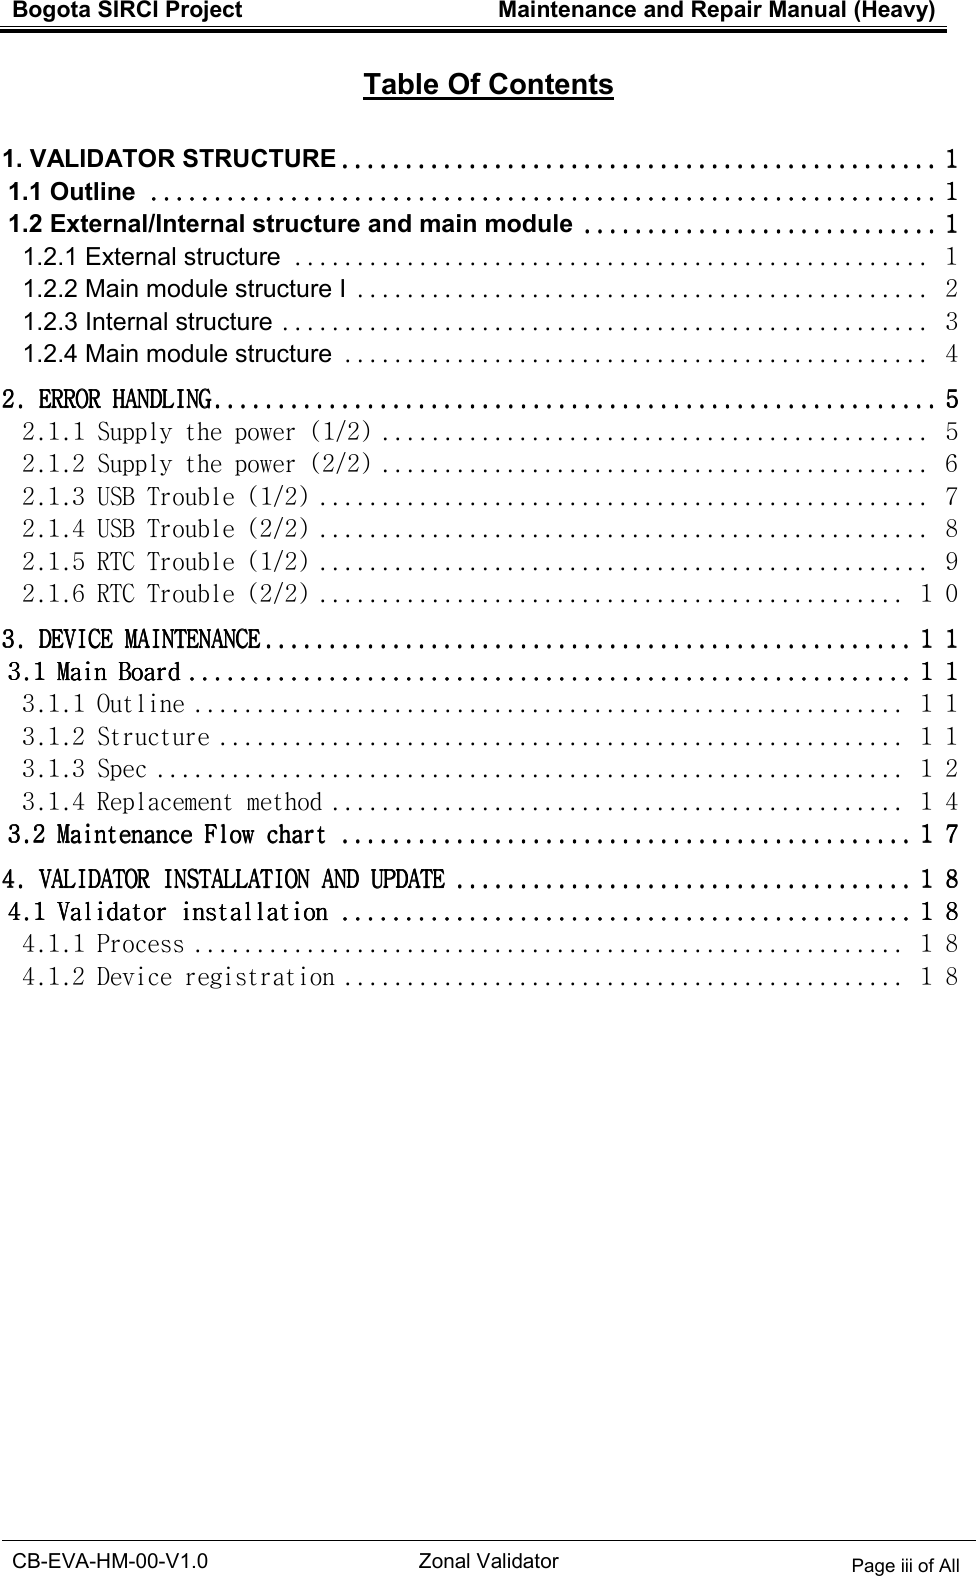 Bogota SIRCI Project  Maintenance and Repair Manual (Heavy)  CB-EVA-HM-00-V1.0 Zonal Validator Page iii of All     Table Of Contents  1. VALIDATOR STRUCTURE    ............................................................................................................................................................................................    １１１１ 1.1 Outline    ........................................................................................................................................................................................................................................................    １１１１ 1.2 External/Internal structure and main module    ................................................................................................................    １１１１ 1.2.1 External structure ................................................... １ 1.2.2 Main module structure I .............................................. ２ 1.2.3 Internal structure .................................................... ３ 1.2.4 Main module structure ............................................... ４ 2. ERROR HANDLING2. ERROR HANDLING2. ERROR HANDLING2. ERROR HANDLING    ....................................................................................................................................................................................................................................    ５５５５ 2.1.1 Supply the power (1/2) ............................................ ５ 2.1.2 Supply the power (2/2) ............................................ ６ 2.1.3 USB Trouble (1/2) ................................................. ７ 2.1.4 USB Trouble (2/2) ................................................. ８ 2.1.5 RTC Trouble (1/2) ................................................. ９ 2.1.6 RTC Trouble (2/2) ............................................... １０ 3. DEVICE MAINTENANC3. DEVICE MAINTENANC3. DEVICE MAINTENANC3. DEVICE MAINTENANCEEEE    ............................................................................................................................................................................................................    １１１１１１１１ 3.1 Main Board3.1 Main Board3.1 Main Board3.1 Main Board    ....................................................................................................................................................................................................................................    １１１１１１１１ 3.1.1 Outline ......................................................... １１ 3.1.2 Structure ....................................................... １１ 3.1.3 Spec ............................................................ １２ 3.1.4 Replacement method .............................................. １４ 3.2 Maintenance Flow chart3.2 Maintenance Flow chart3.2 Maintenance Flow chart3.2 Maintenance Flow chart    ....................................................................................................................................................................................    １７１７１７１７ 4. VALIDATOR INSTALL4. VALIDATOR INSTALL4. VALIDATOR INSTALL4. VALIDATOR INSTALLATION AND UPDATEATION AND UPDATEATION AND UPDATEATION AND UPDATE    ................................................................................................................................................    １８１８１８１８ 4.1 Validator installation4.1 Validator installation4.1 Validator installation4.1 Validator installation    ....................................................................................................................................................................................    １８１８１８１８ 4.1.1 Process ......................................................... １８ 4.1.2 Device registration ............................................. １８    